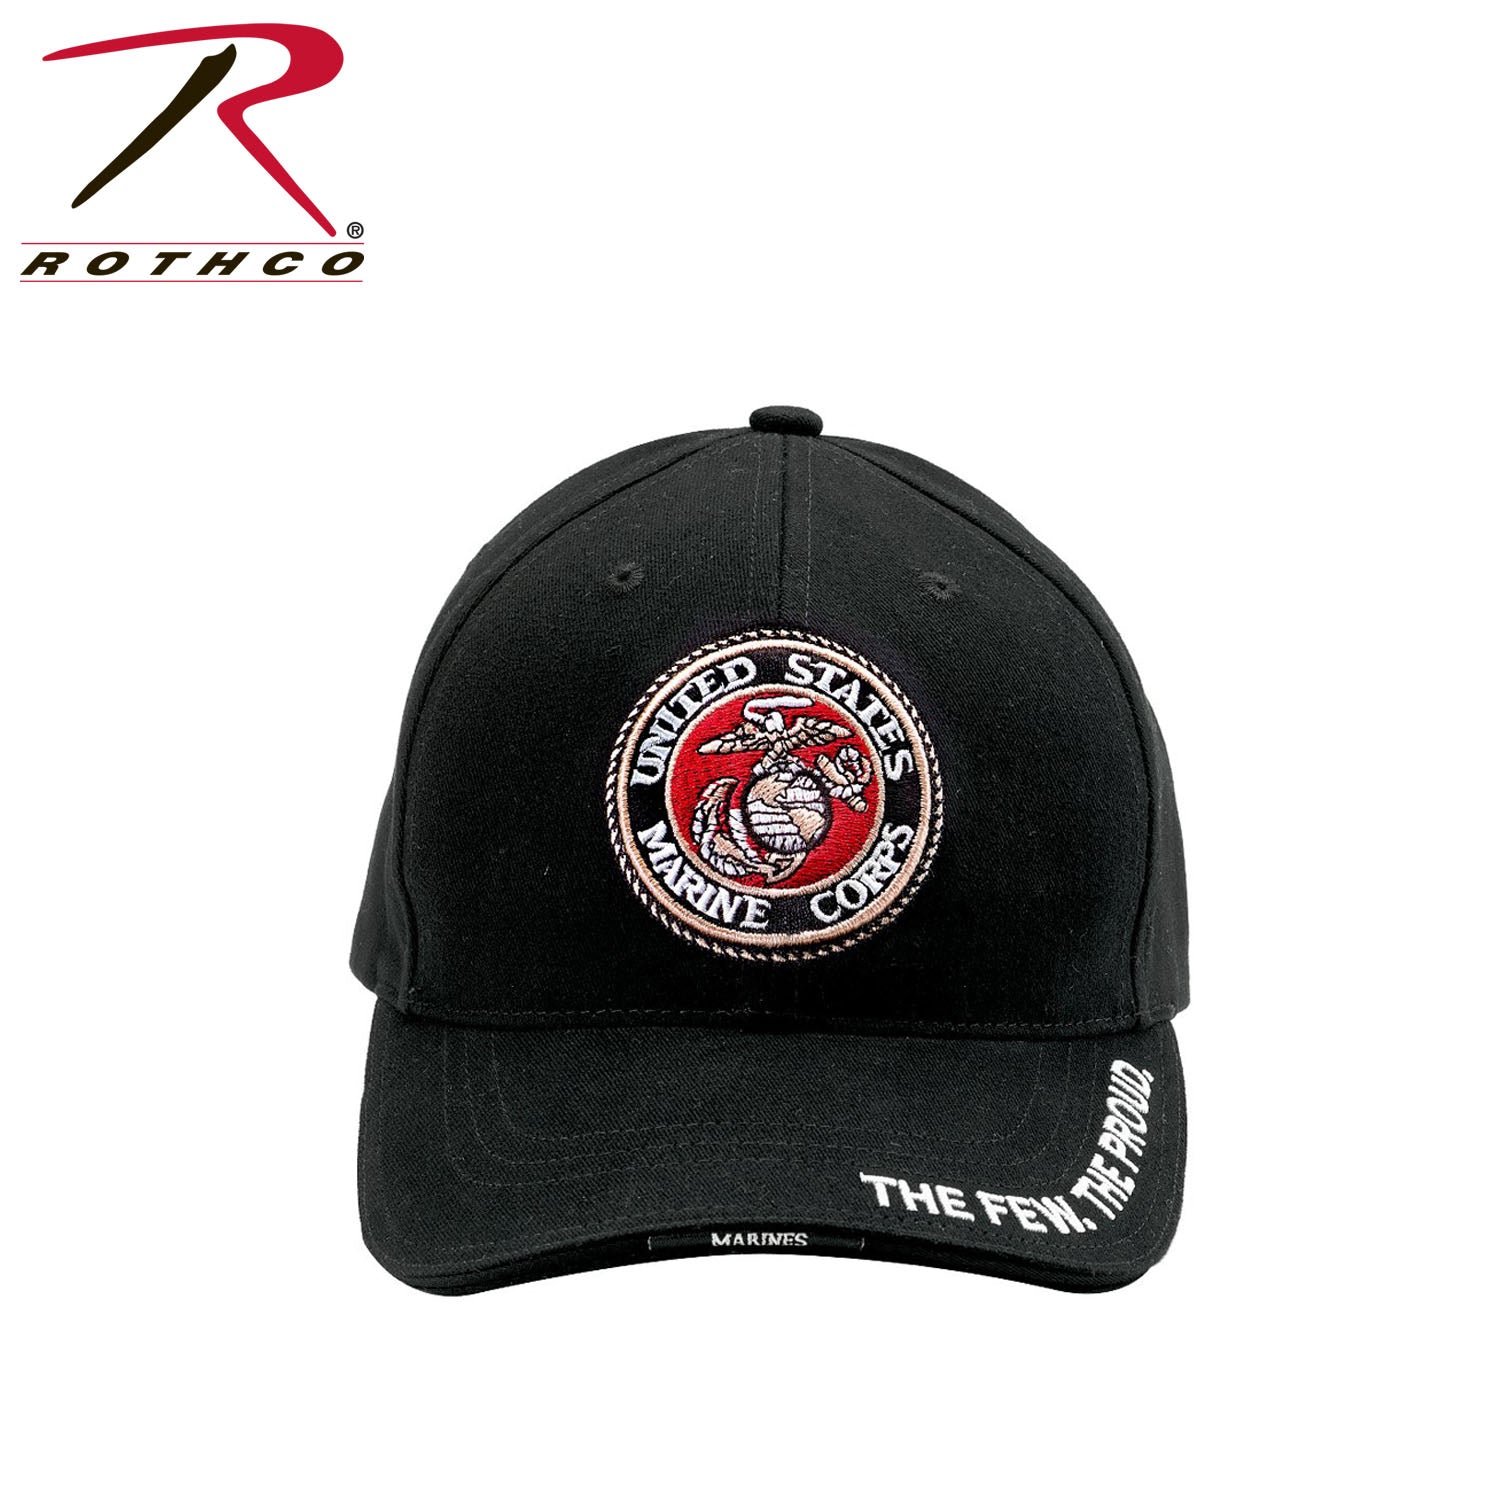 Rothco Deluxe Low Profile Cap With USMC Eagle, Globe & Anchor Logo - Tactical Choice Plus